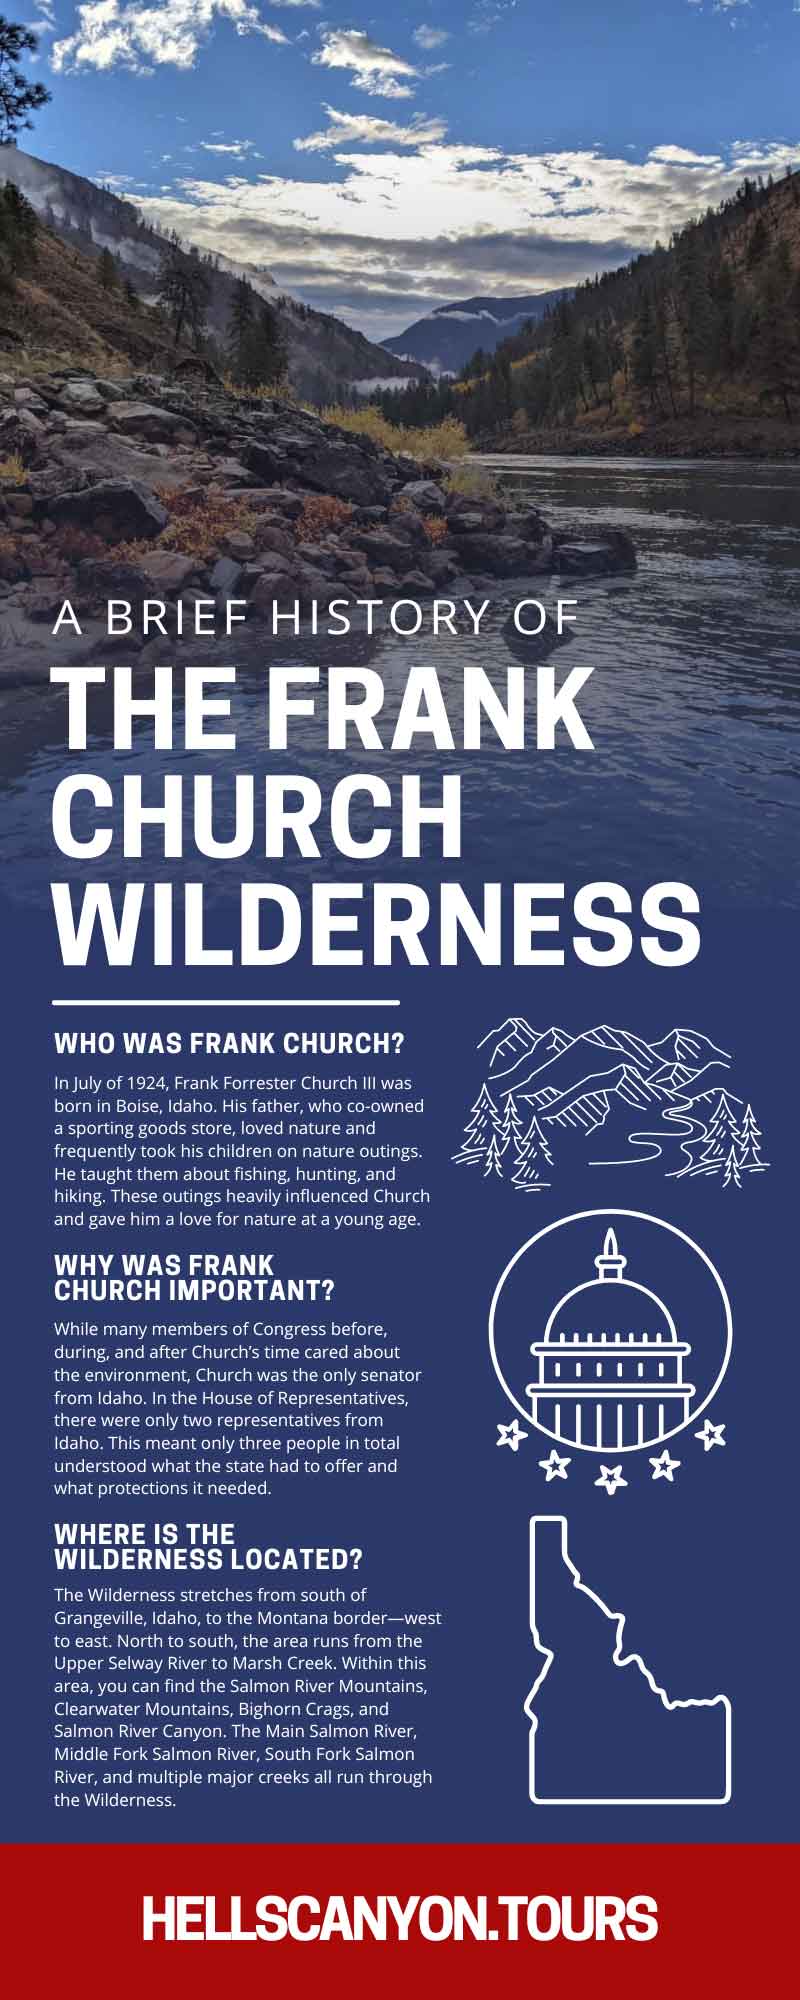 A Brief History of the Frank Church Wilderness